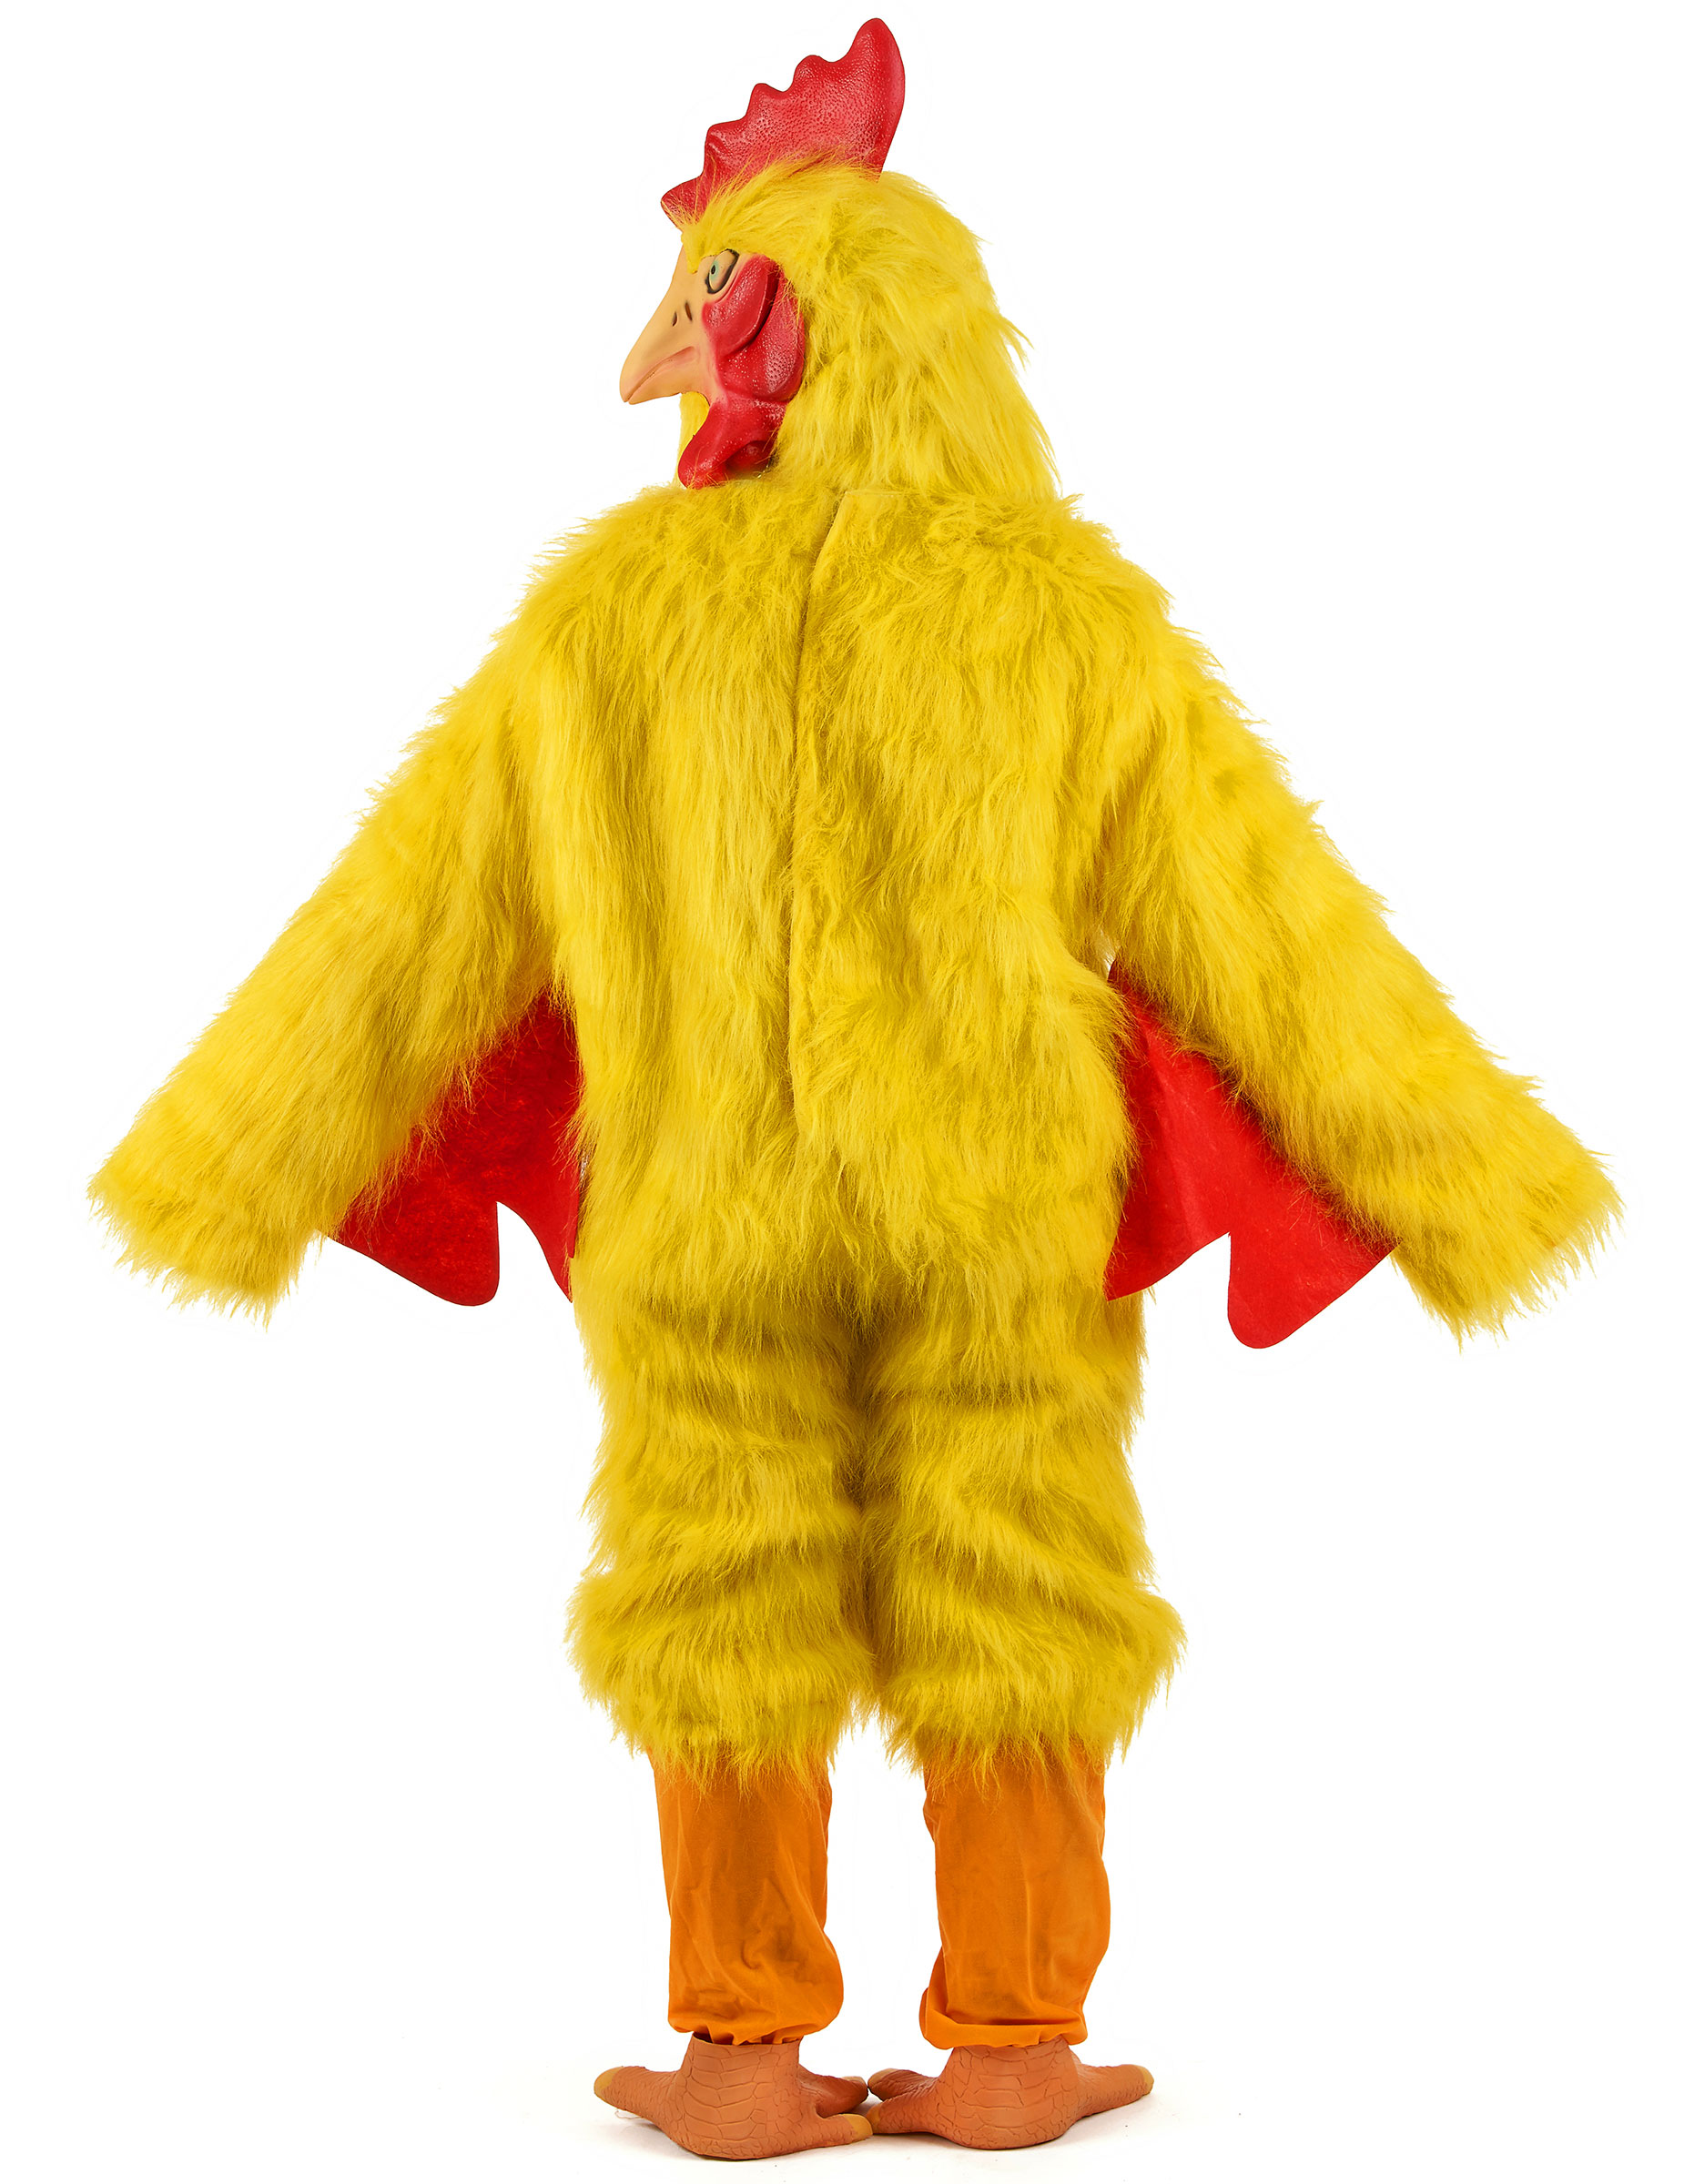 Yellow chicken costume: Adults Costumes,and fancy dress costumes ...